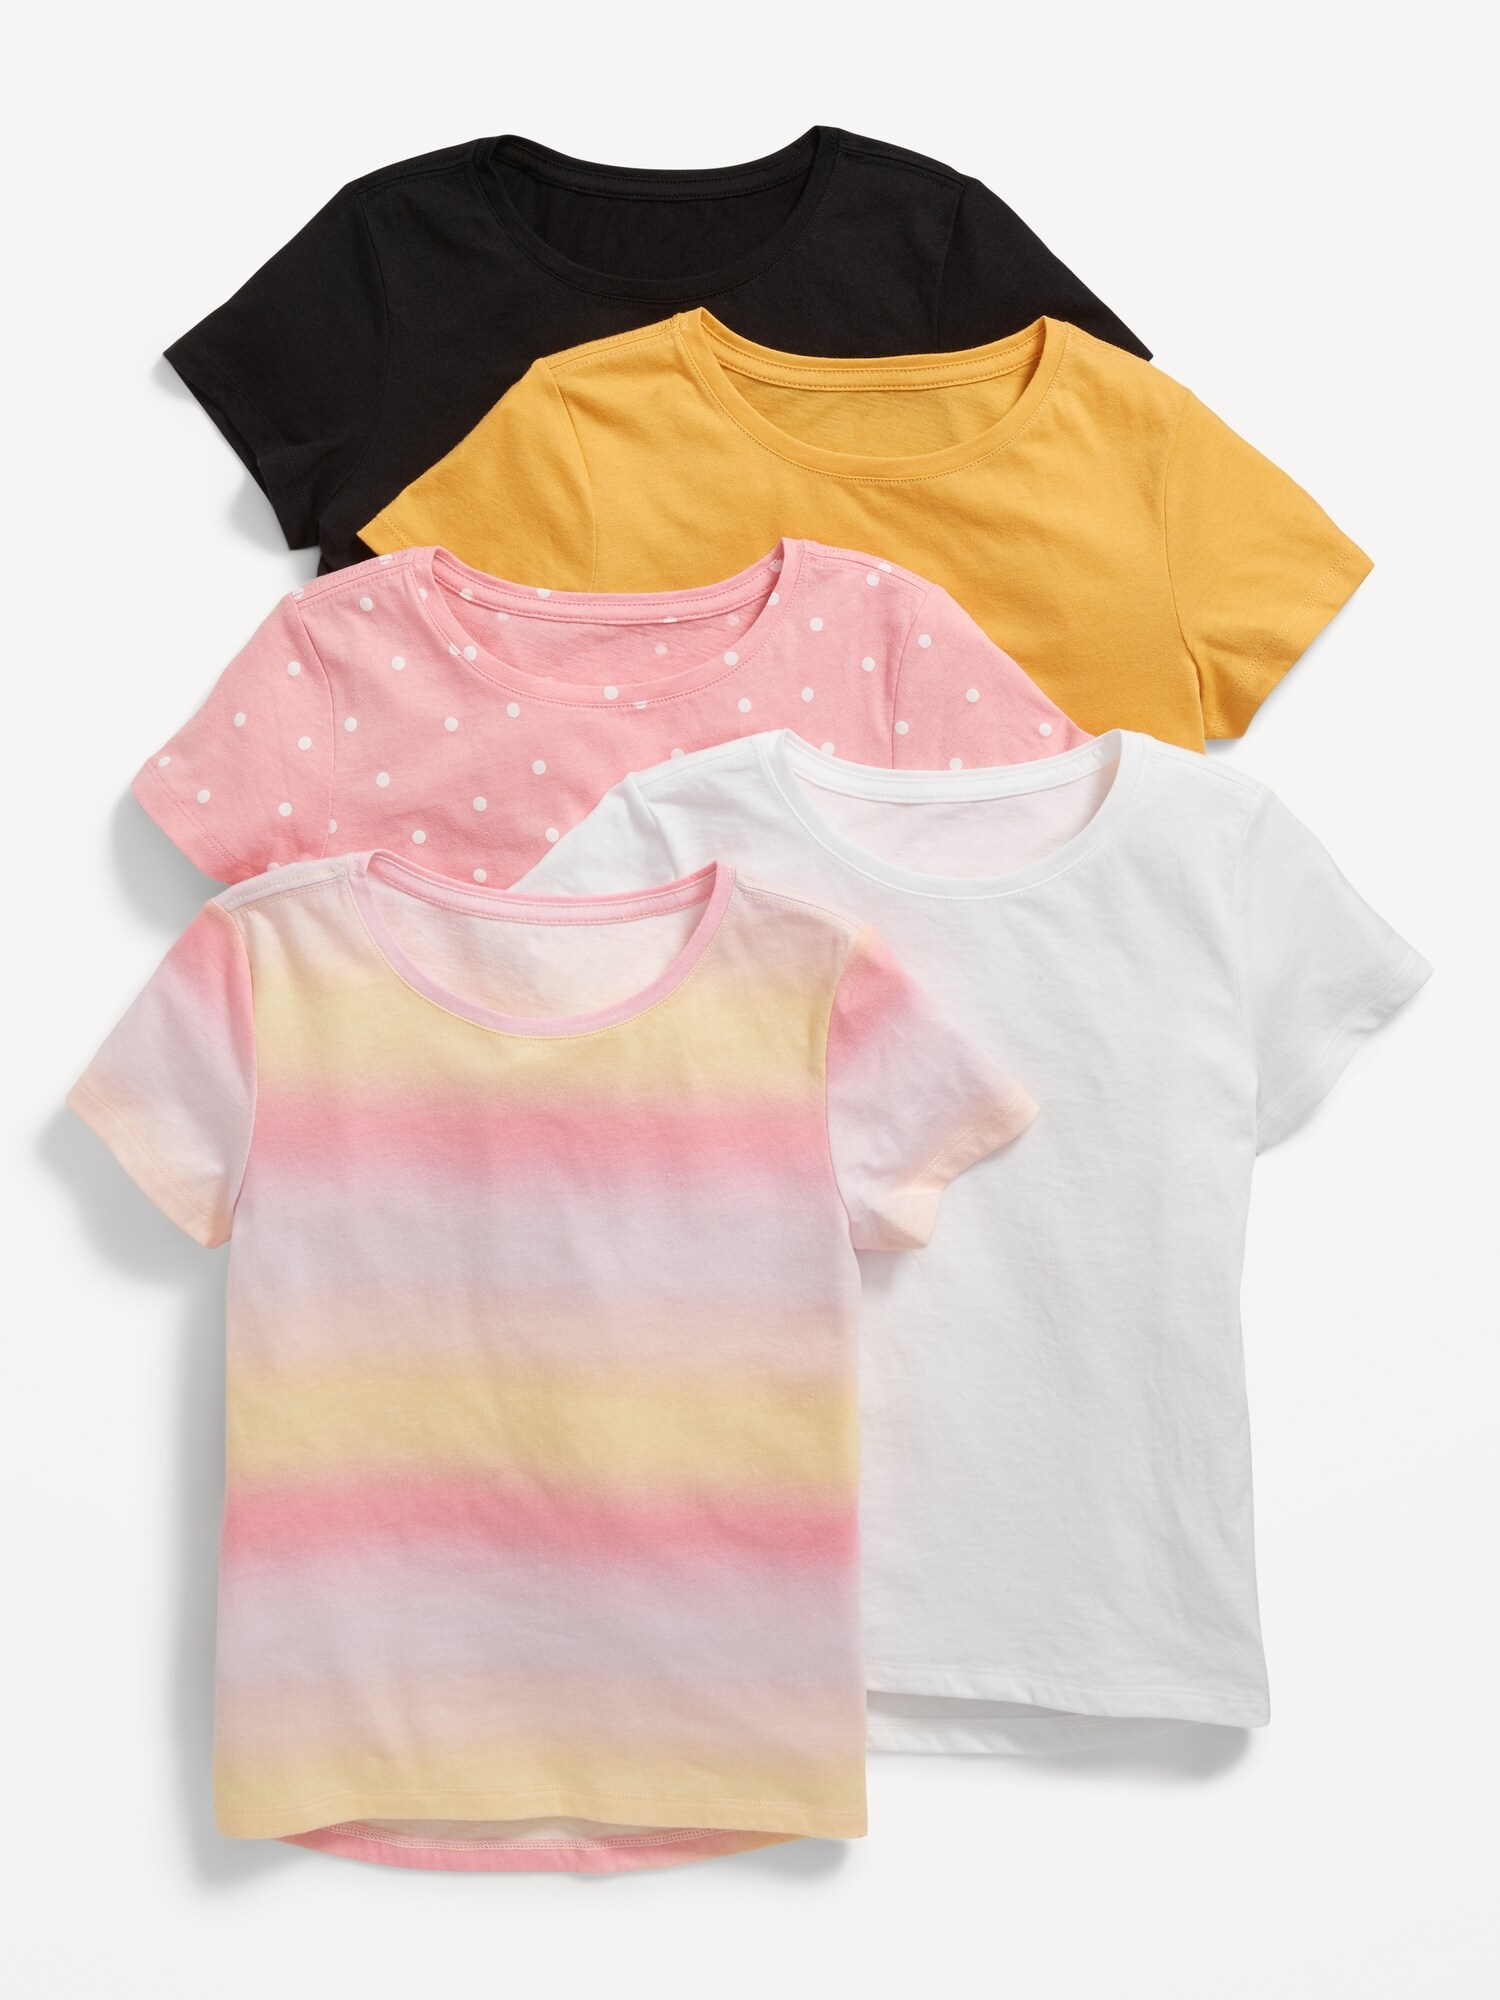 Old Navy Softest Printed T-Shirt 5-Pack for Girls pink. 1